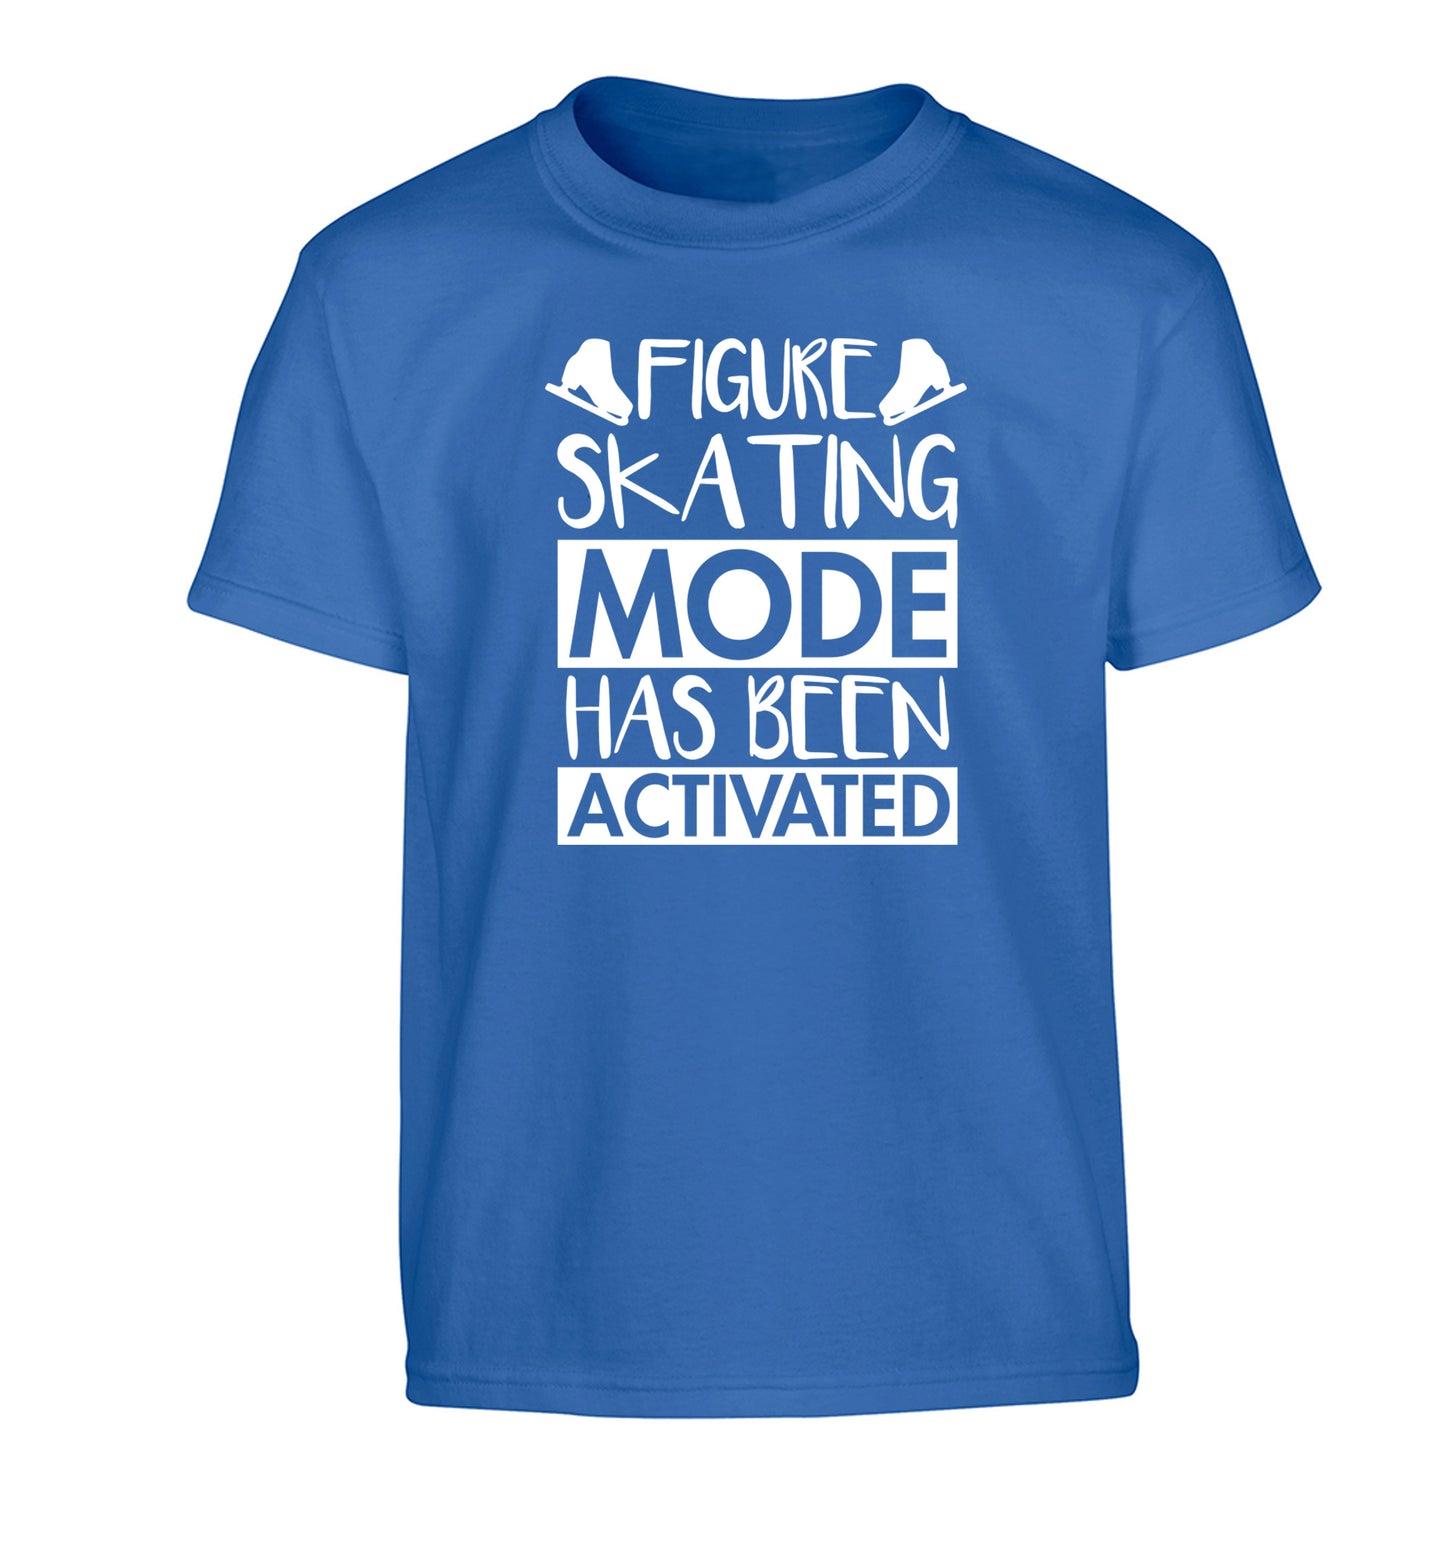 Figure skating mode activated Children's blue Tshirt 12-14 Years